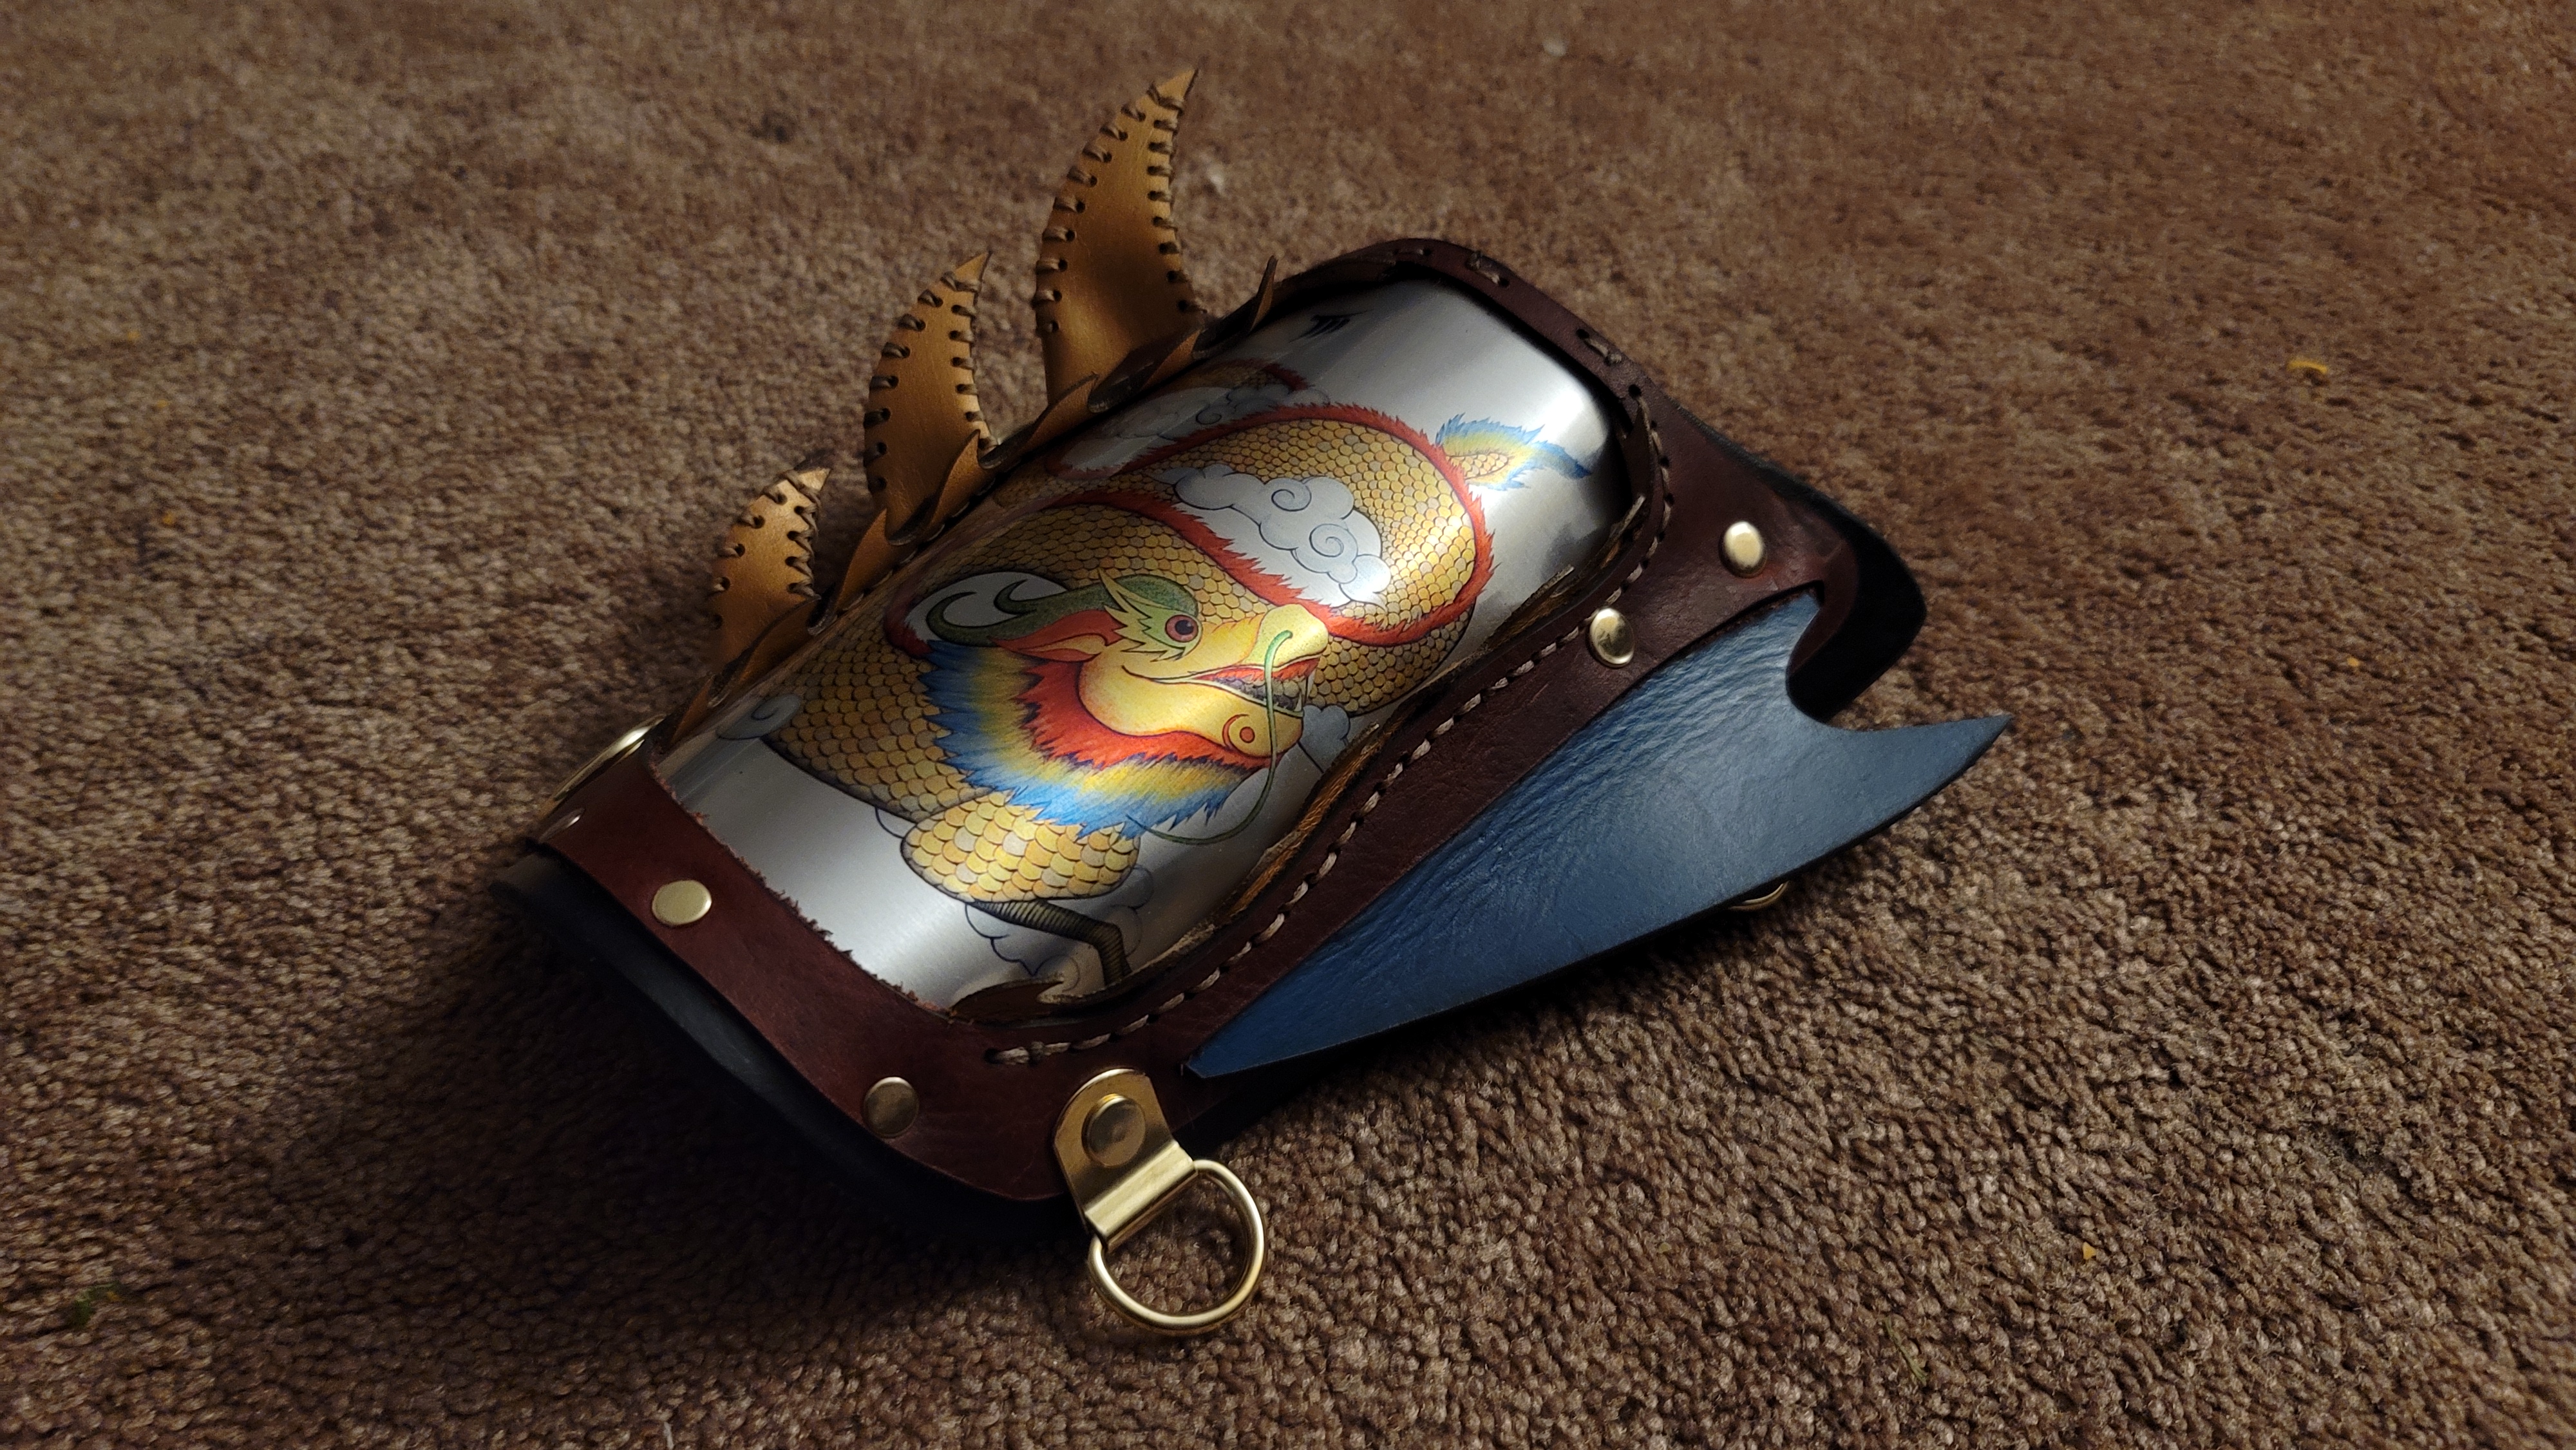 Leather Dragon Vanguard Bracers made with sublimation printing